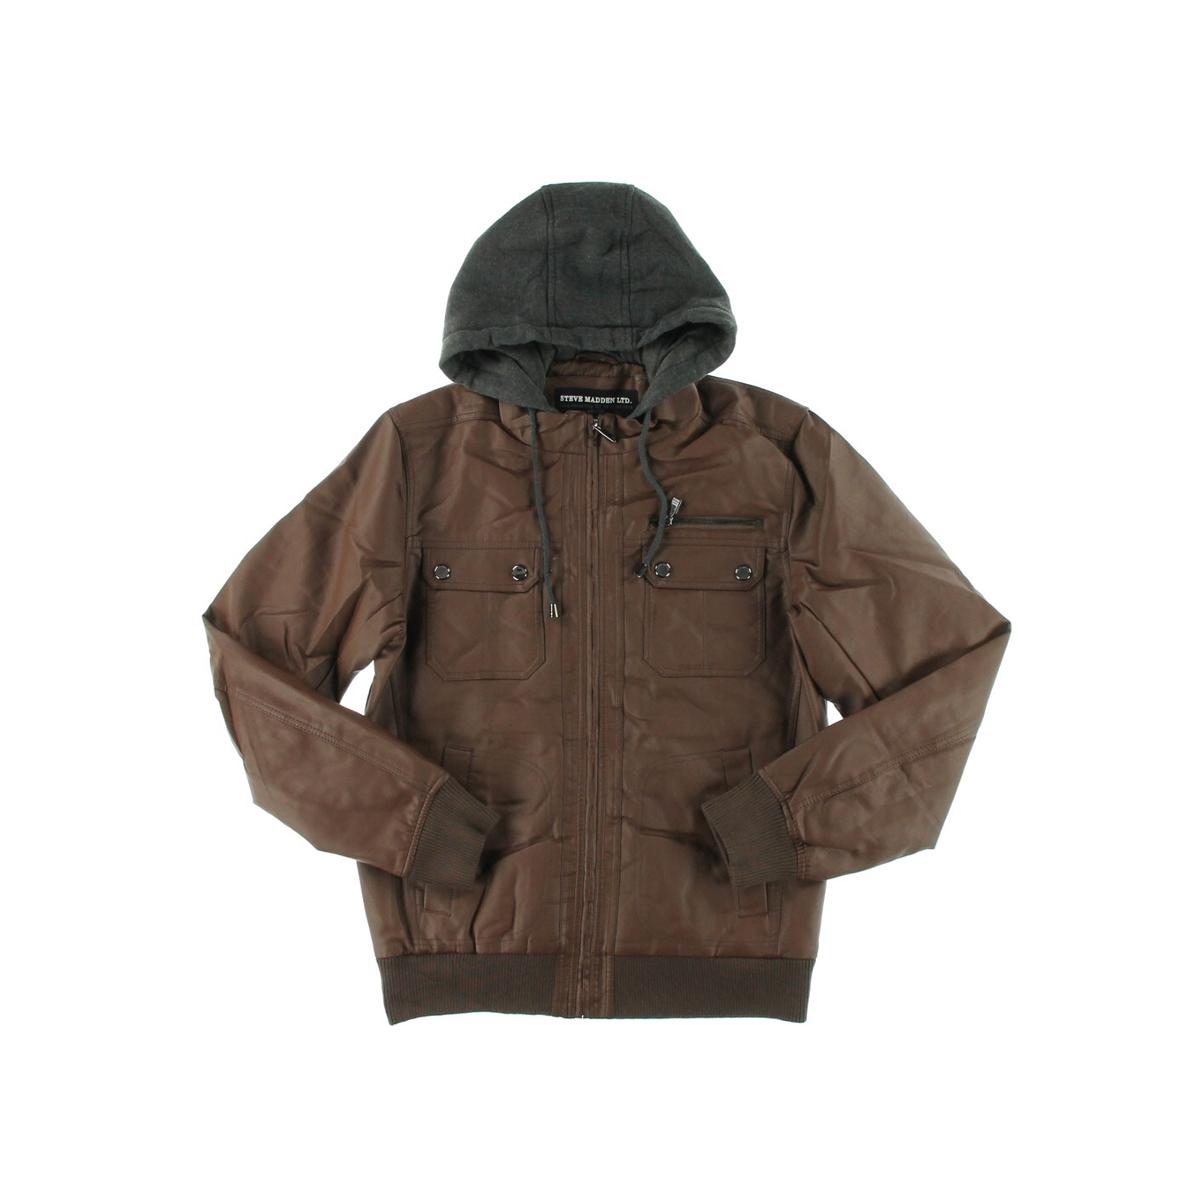 Steve Madden 2728 Mens Faux Leather Hooded Outerwear Jacket Coat BHFO ...